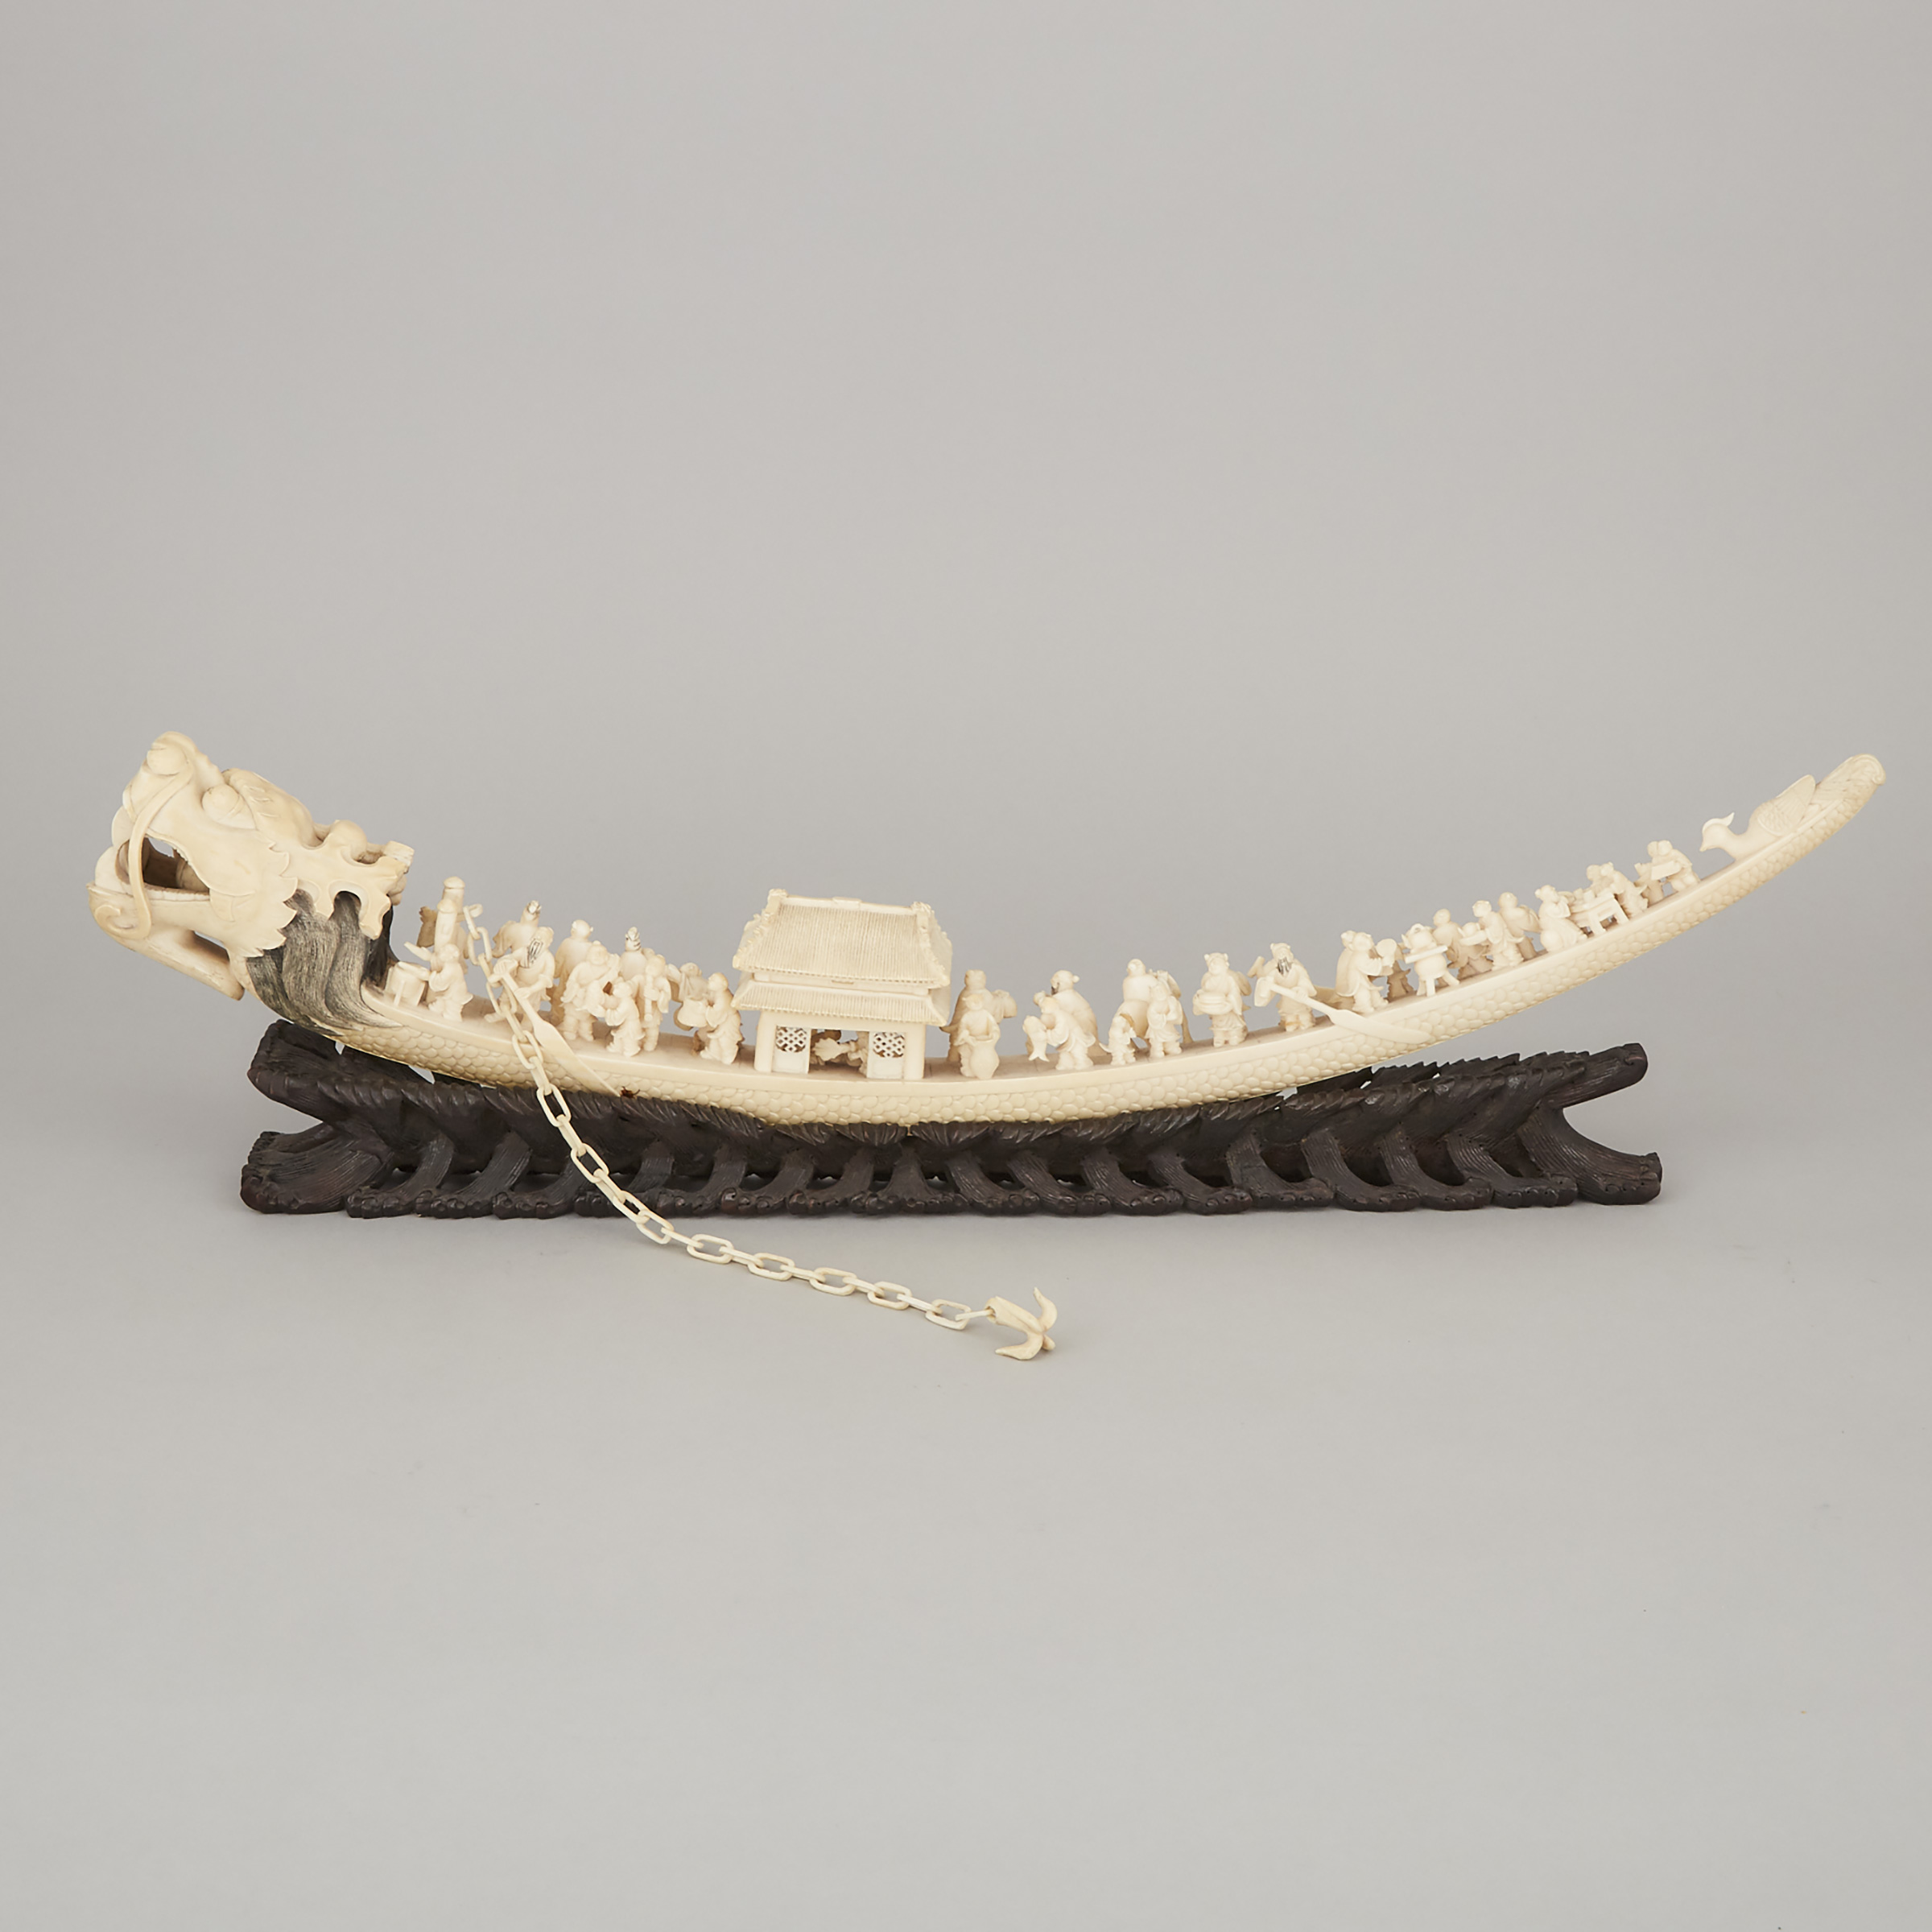 An Ivory Carved Dragon Boat, Early 20th Century